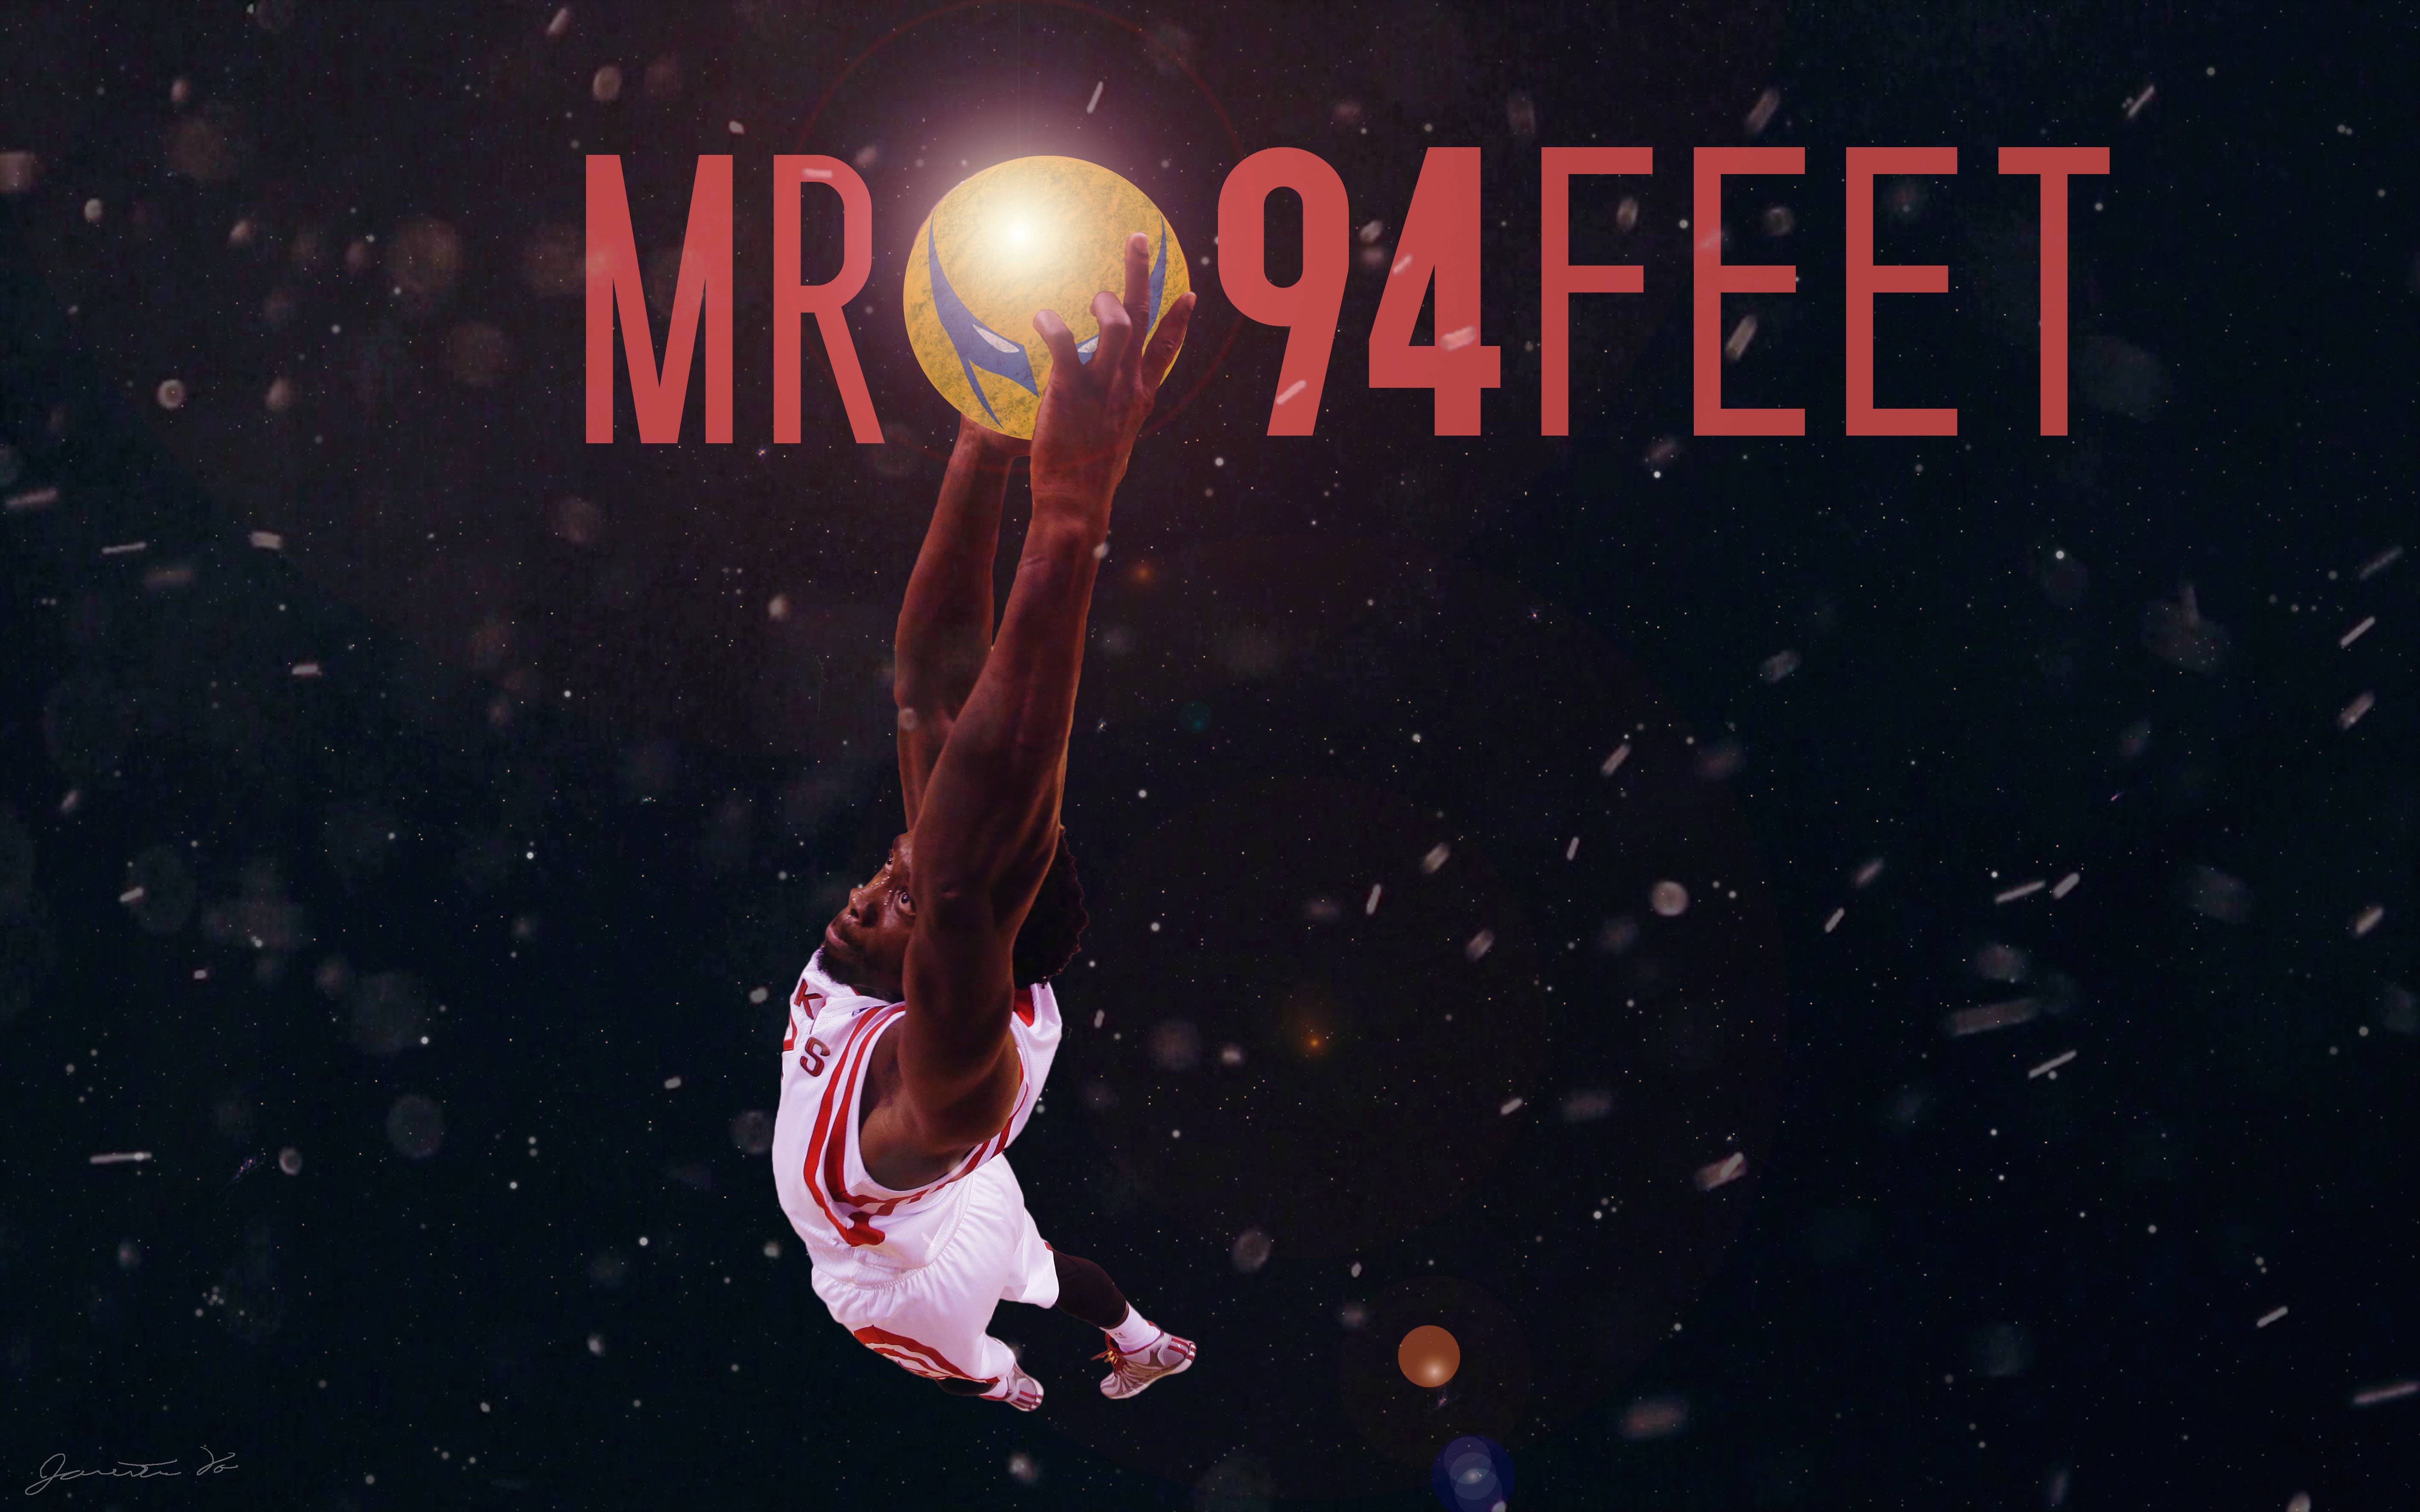 Still learning, but here's a Patrick Beverley Mr 94feet